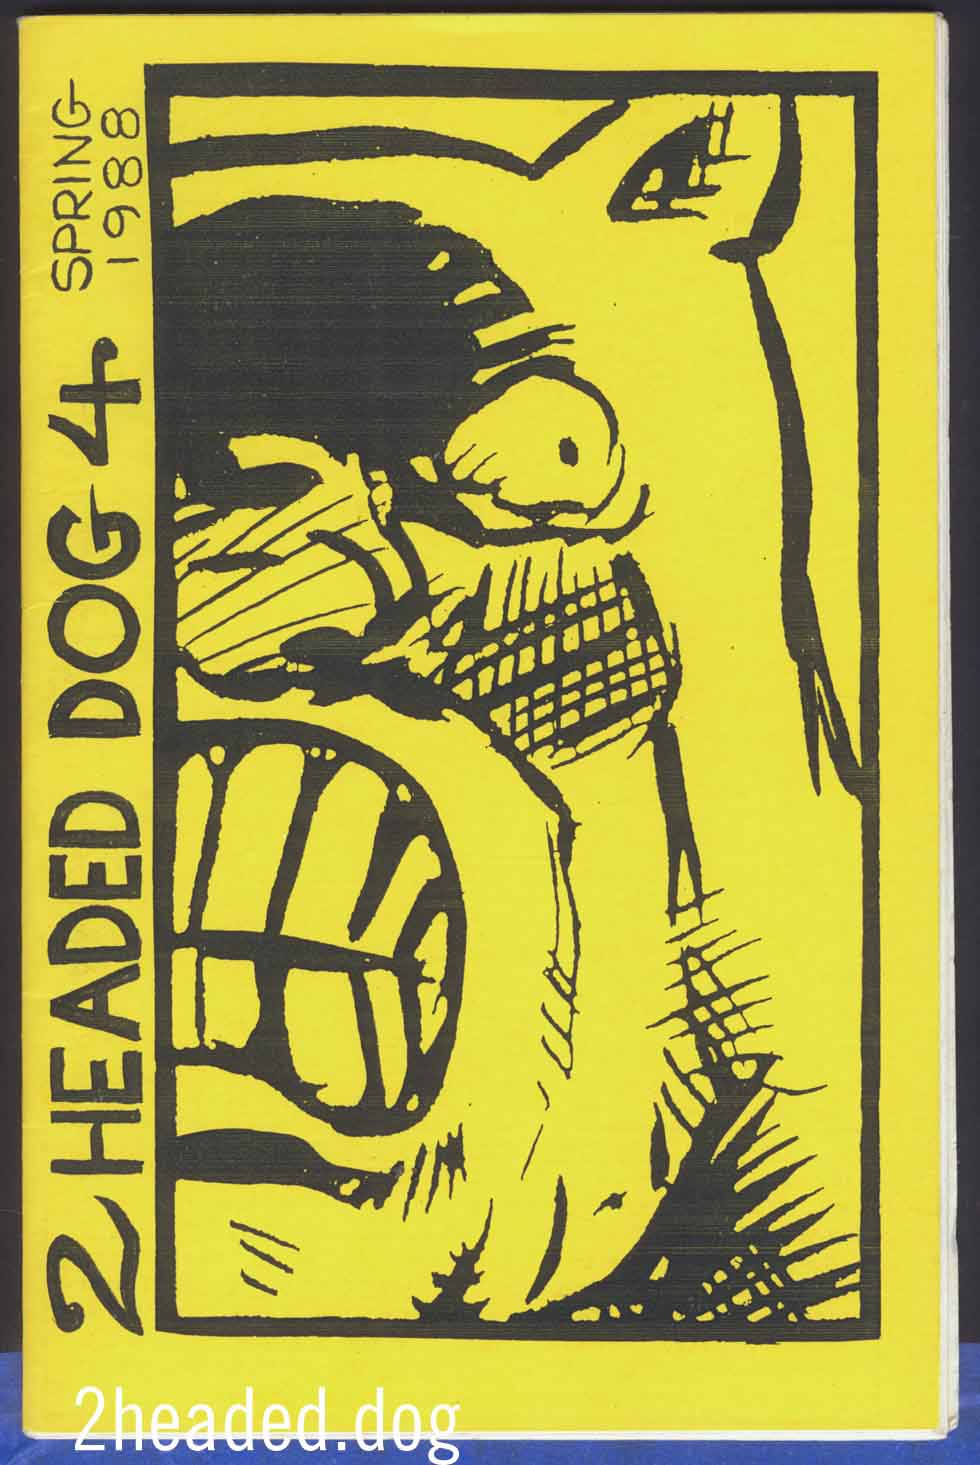 Two Headed Dog issue 4 - 1988